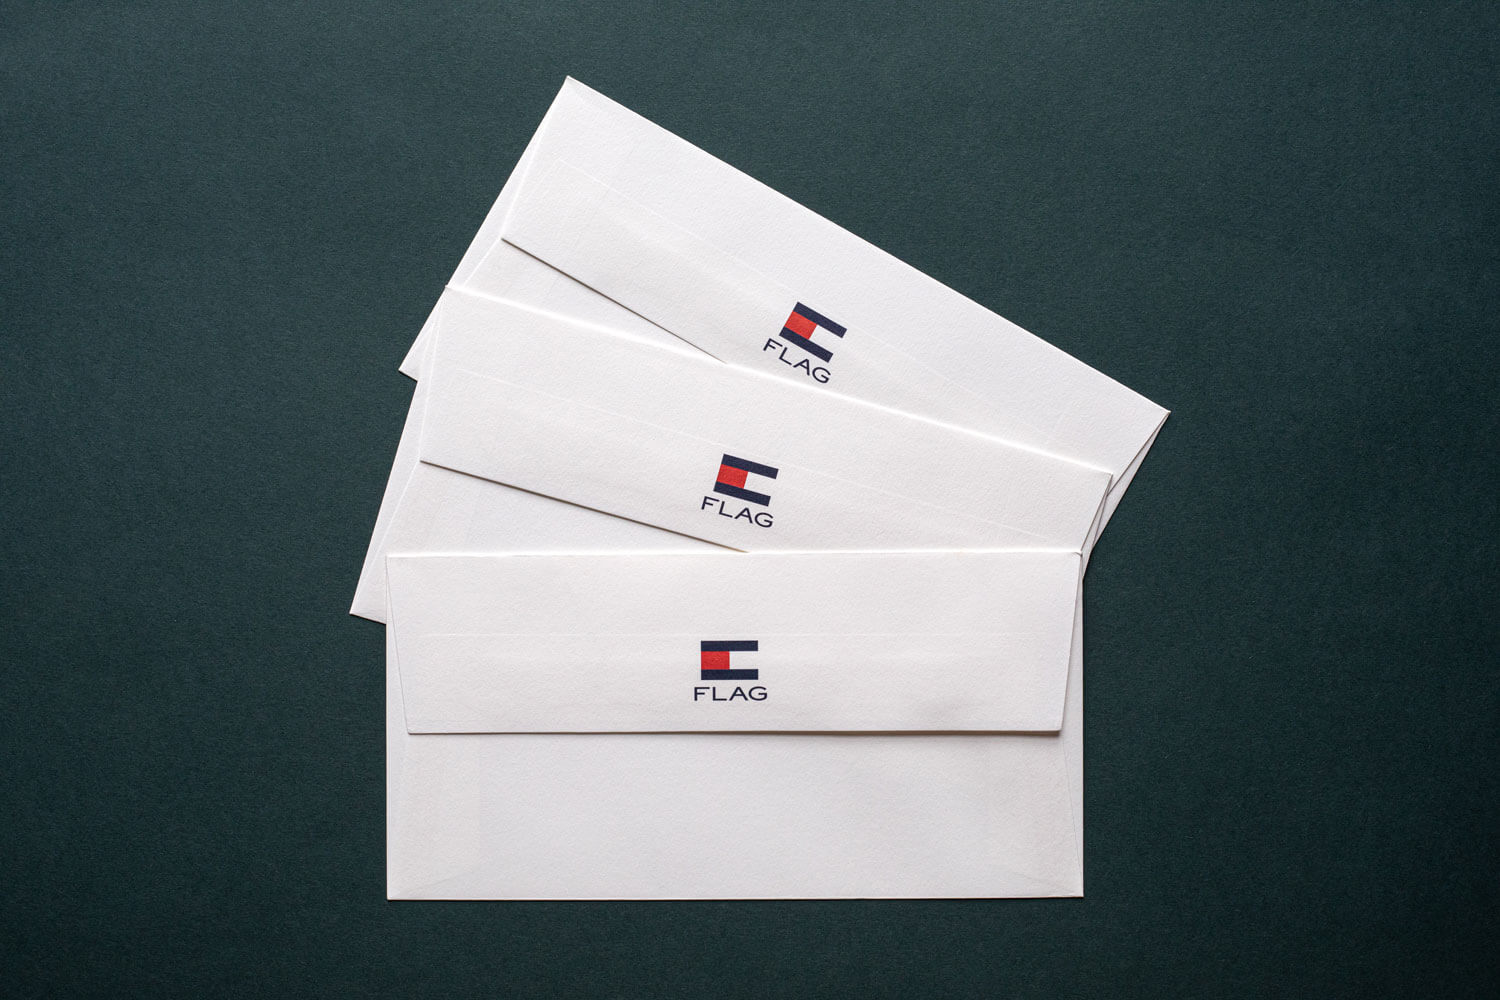 premium white envelopes with a corporate logo printed in red and blue